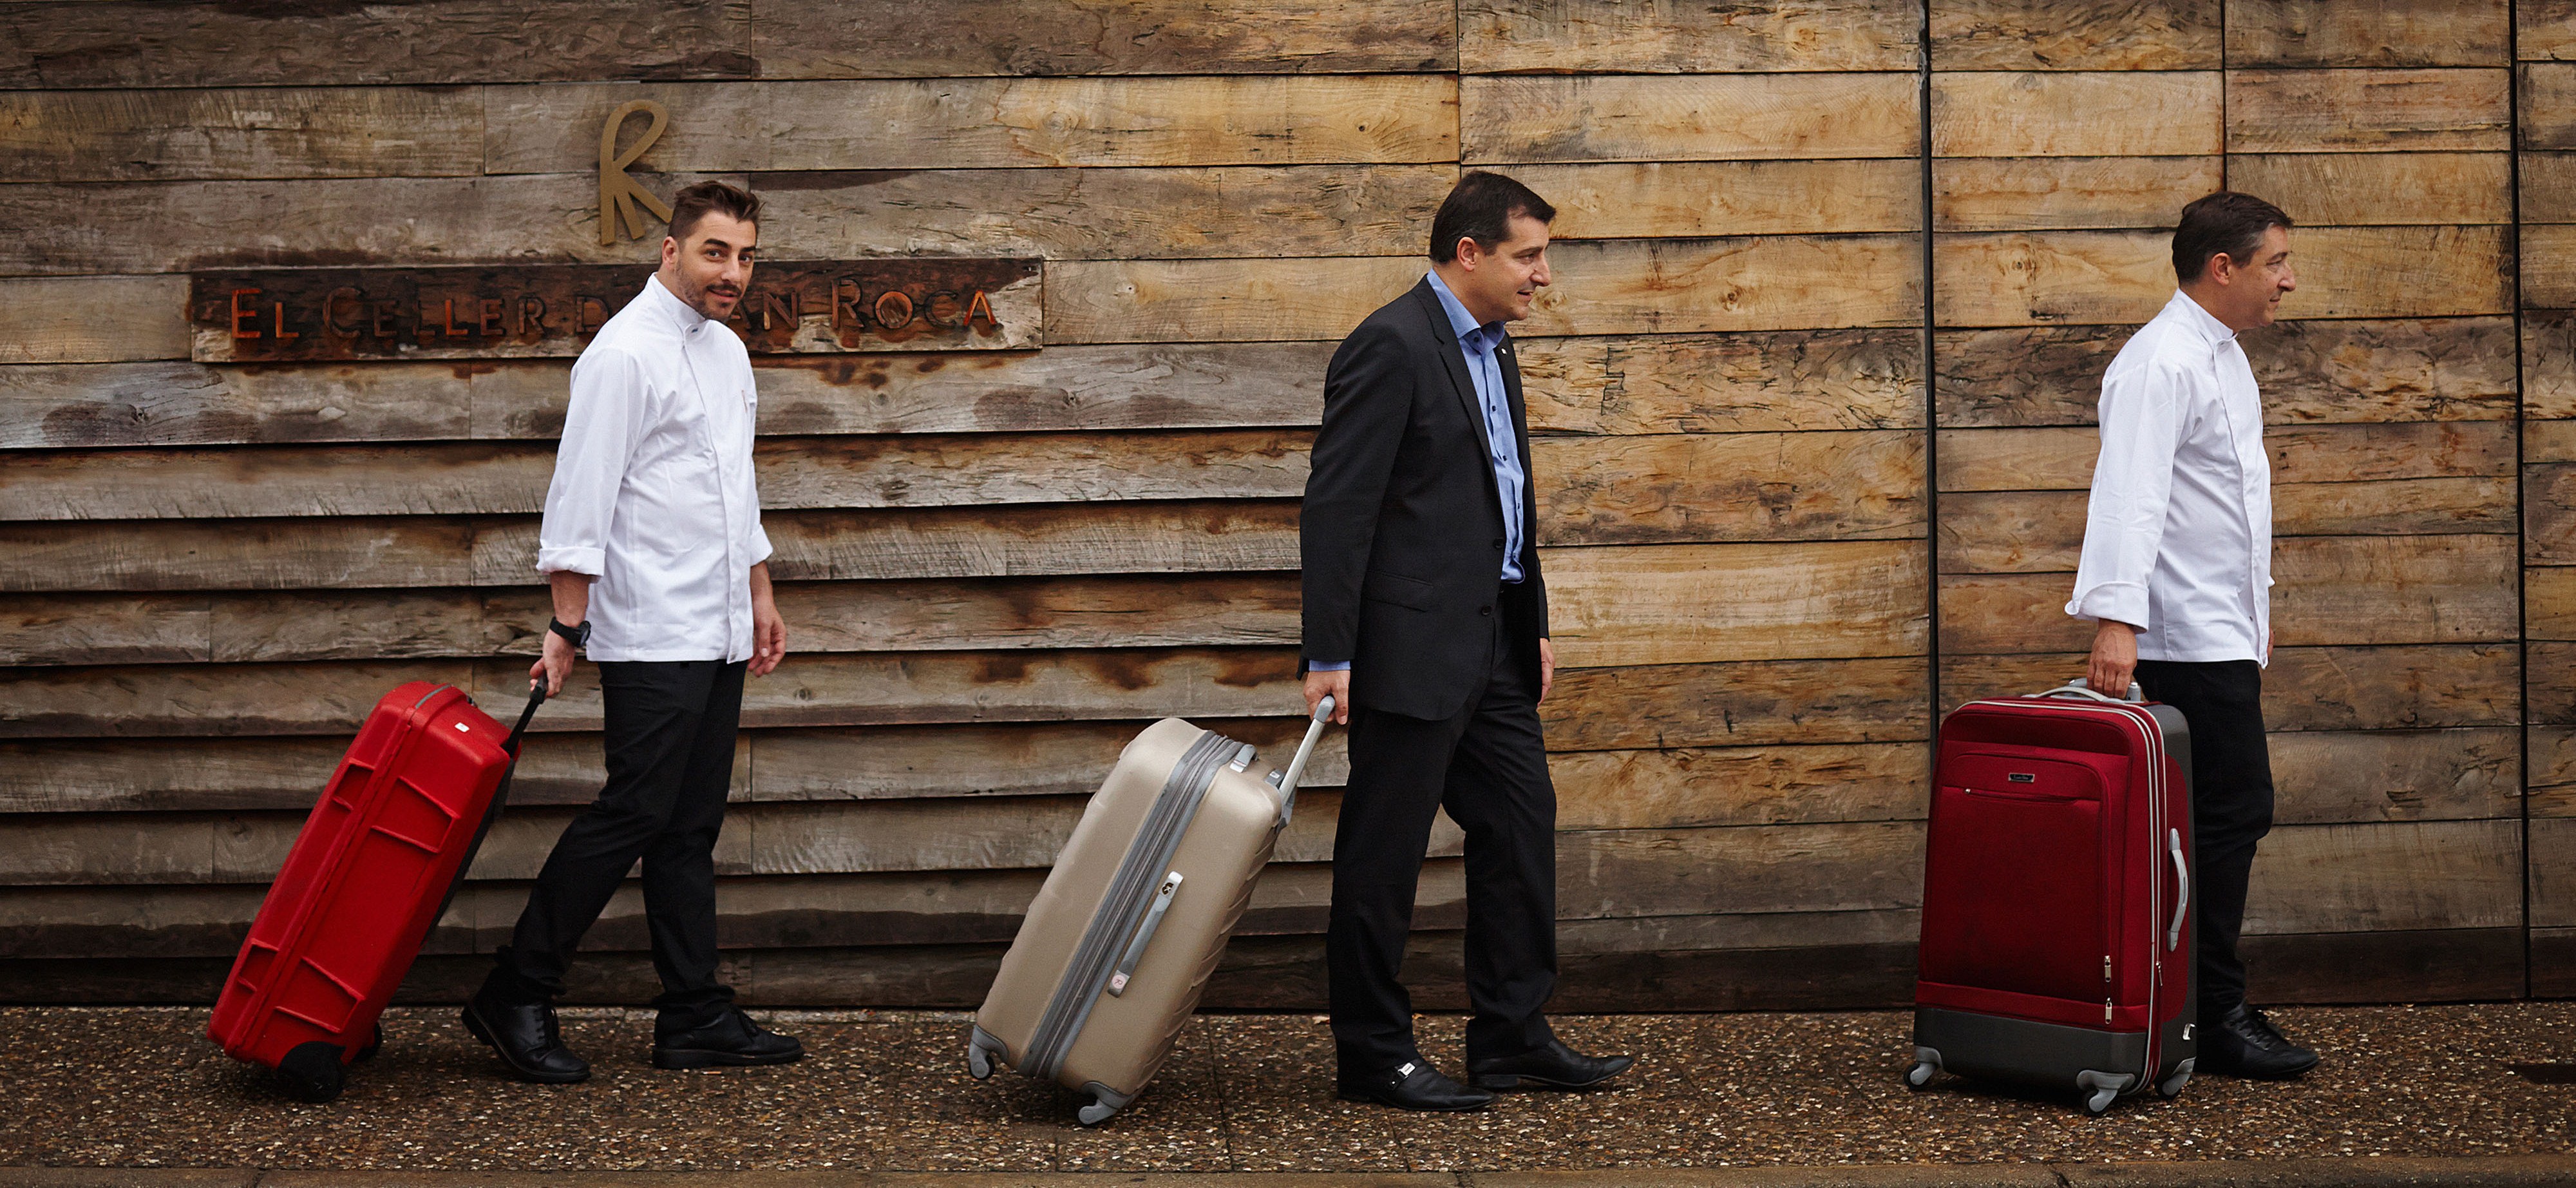 Picture of the Roca brothers with their suitcase BBVA